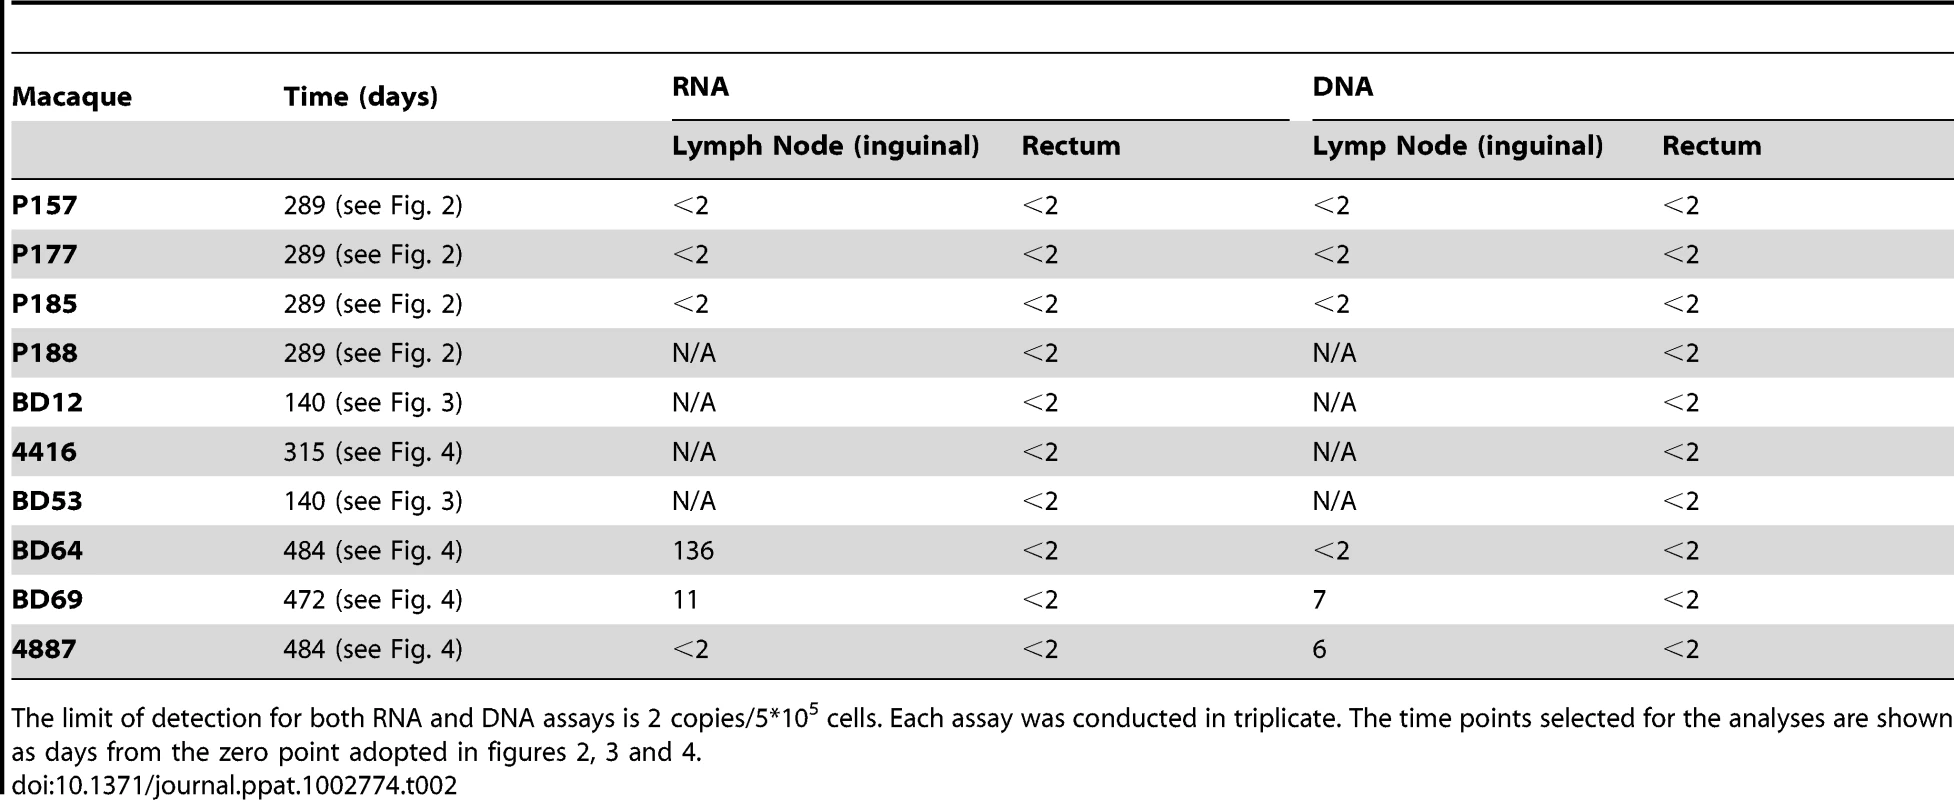 Cell associated RNA and DNA in lymph nodes and rectum.